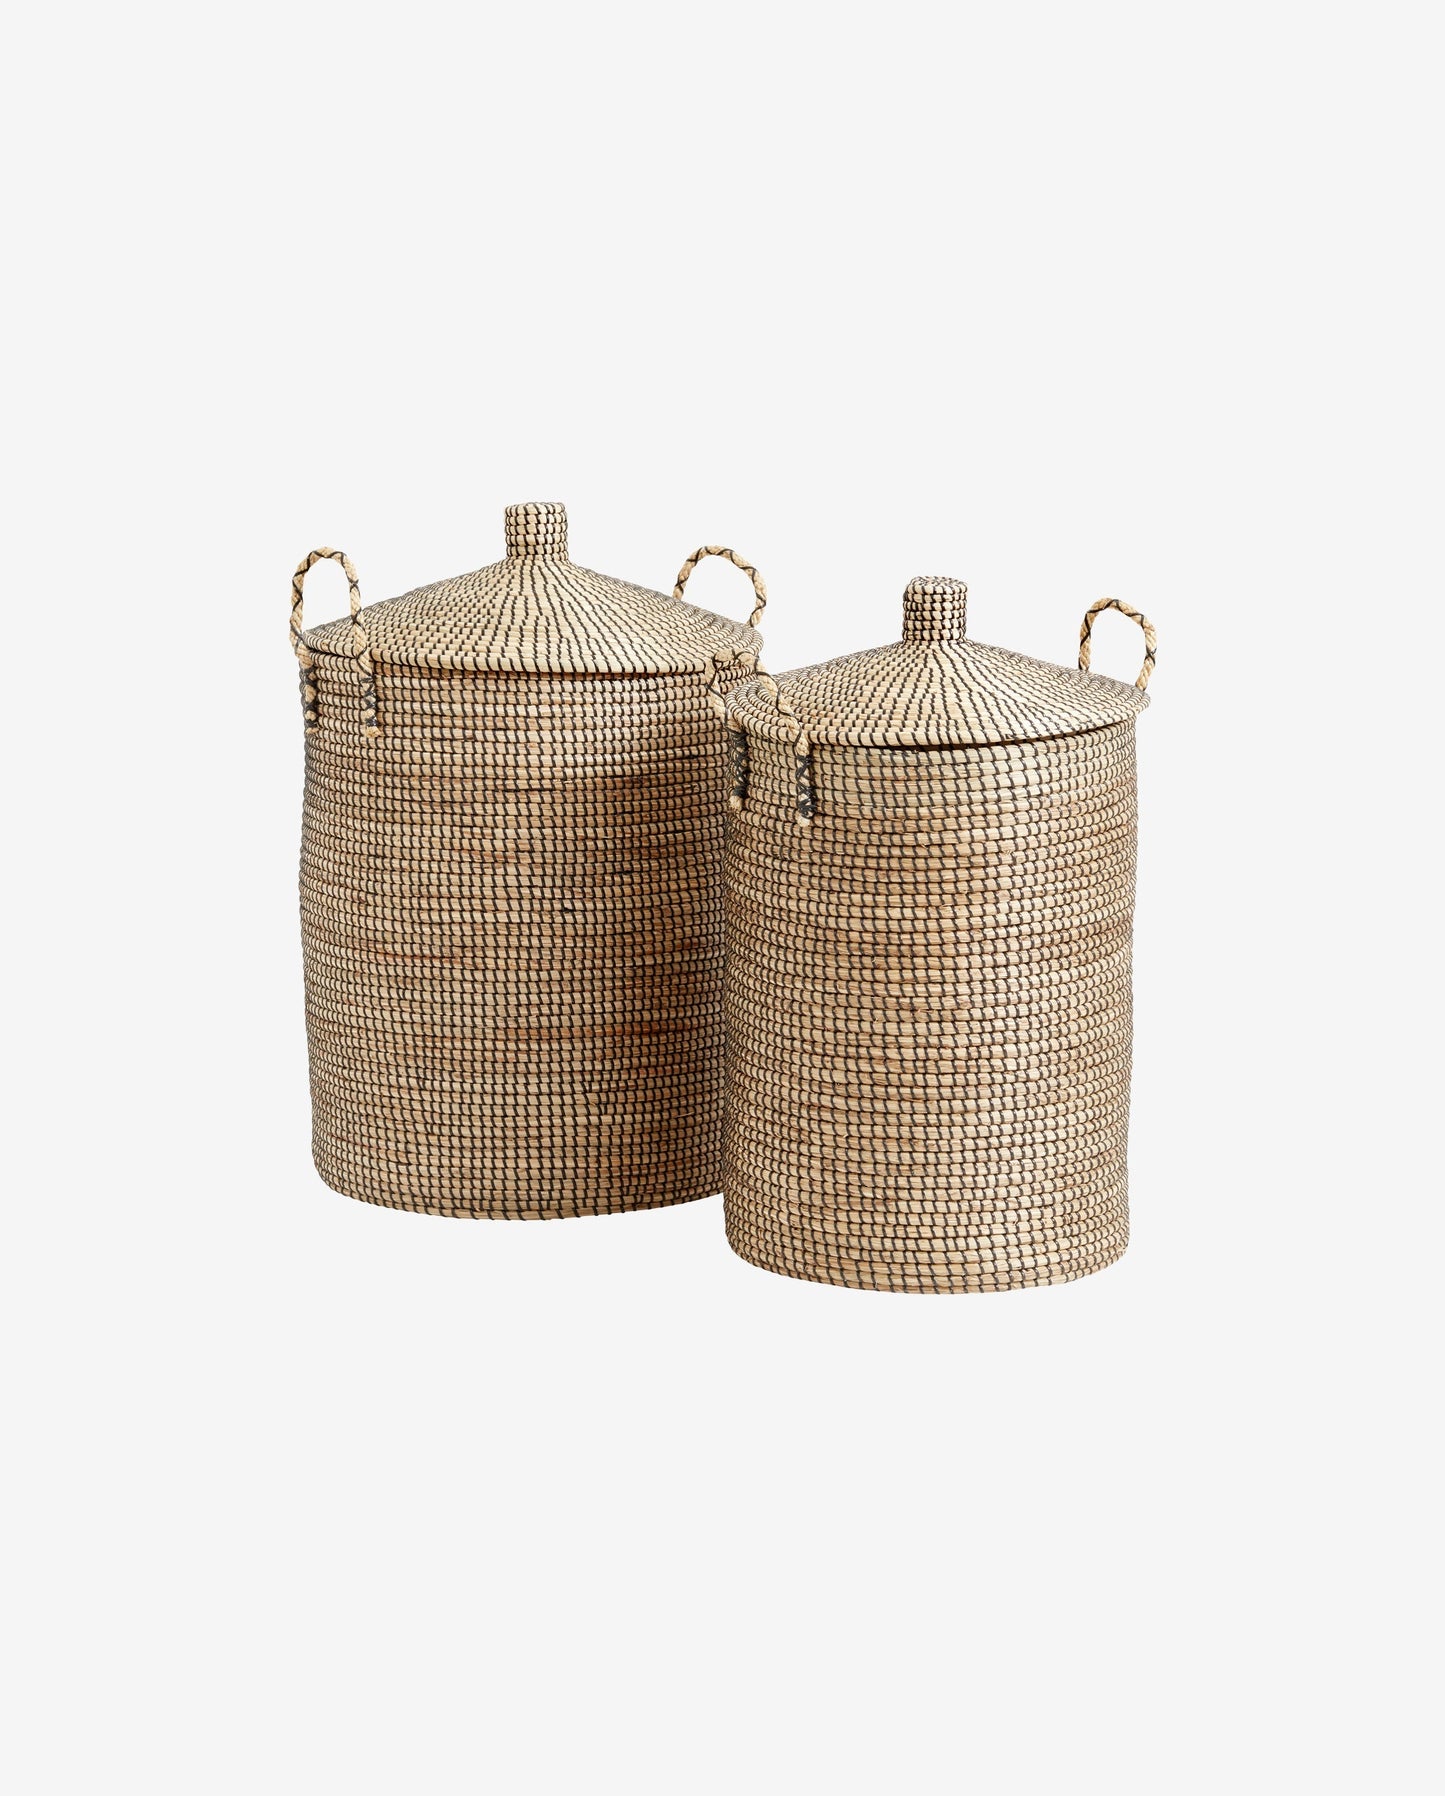 Nordal LAUDY baskets, s/2, nature/black